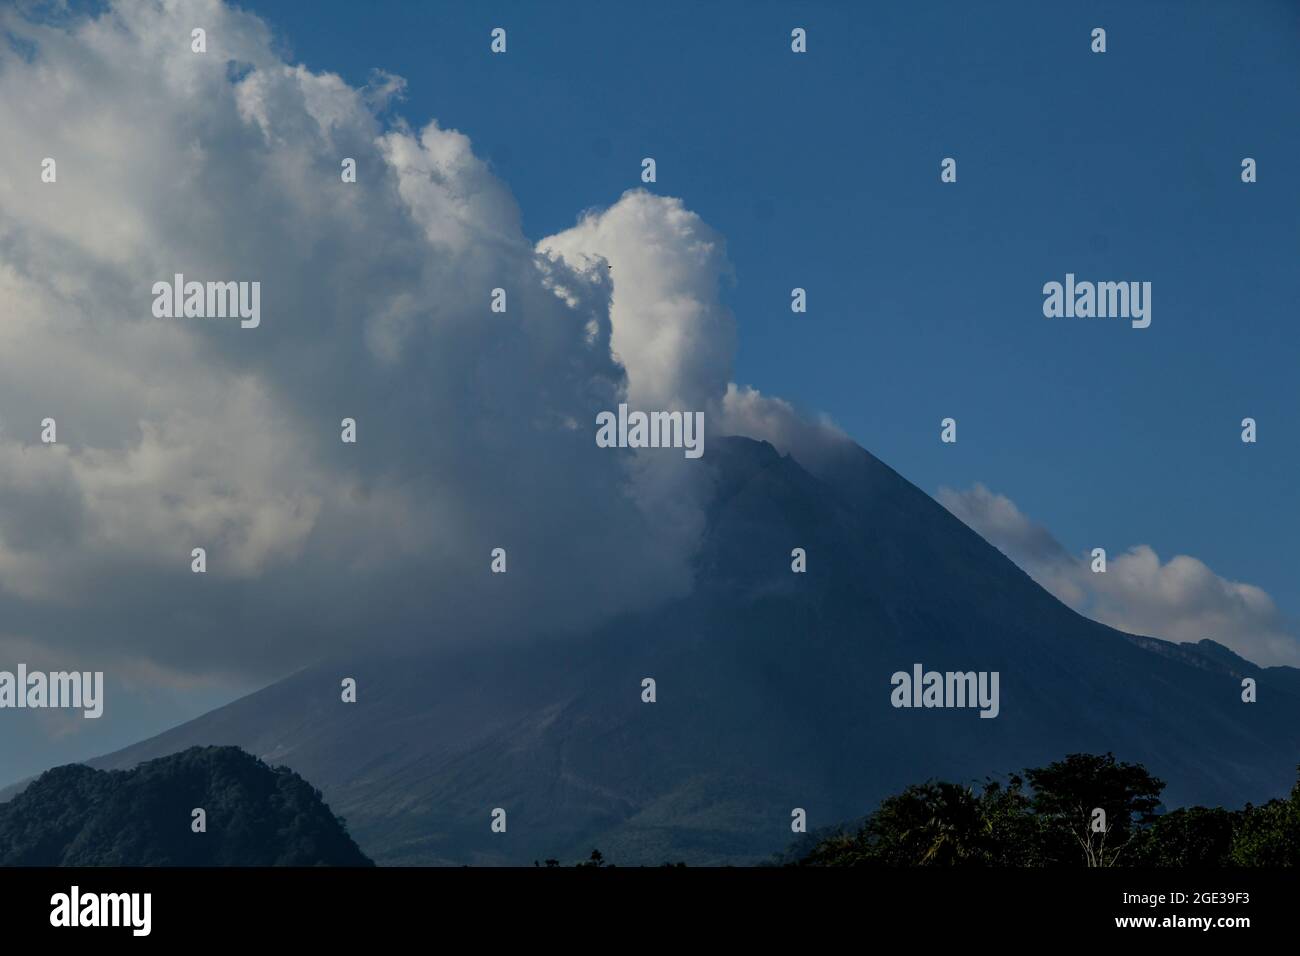 Sleman, Yogyakarta, Indonesia. 15th Aug, 2021. Mount Merapi emitting white clouds is seen in Sleman, Yogyakarta, Indonesia on Sunday, August 15, 2021. Head of the Geological Disaster Technology Research and Development Center (BPPTKG) Hanik Humaida stated that Mount Merapi had erupted and caused 3,500 meters of hot clouds and ash rain on Monday, August 16, 2021. Mount Merapi erupted violently in 2010 and killed more than 300 people. (Credit Image: © Slamet Riyadi/ZUMA Press Wire) Stock Photo